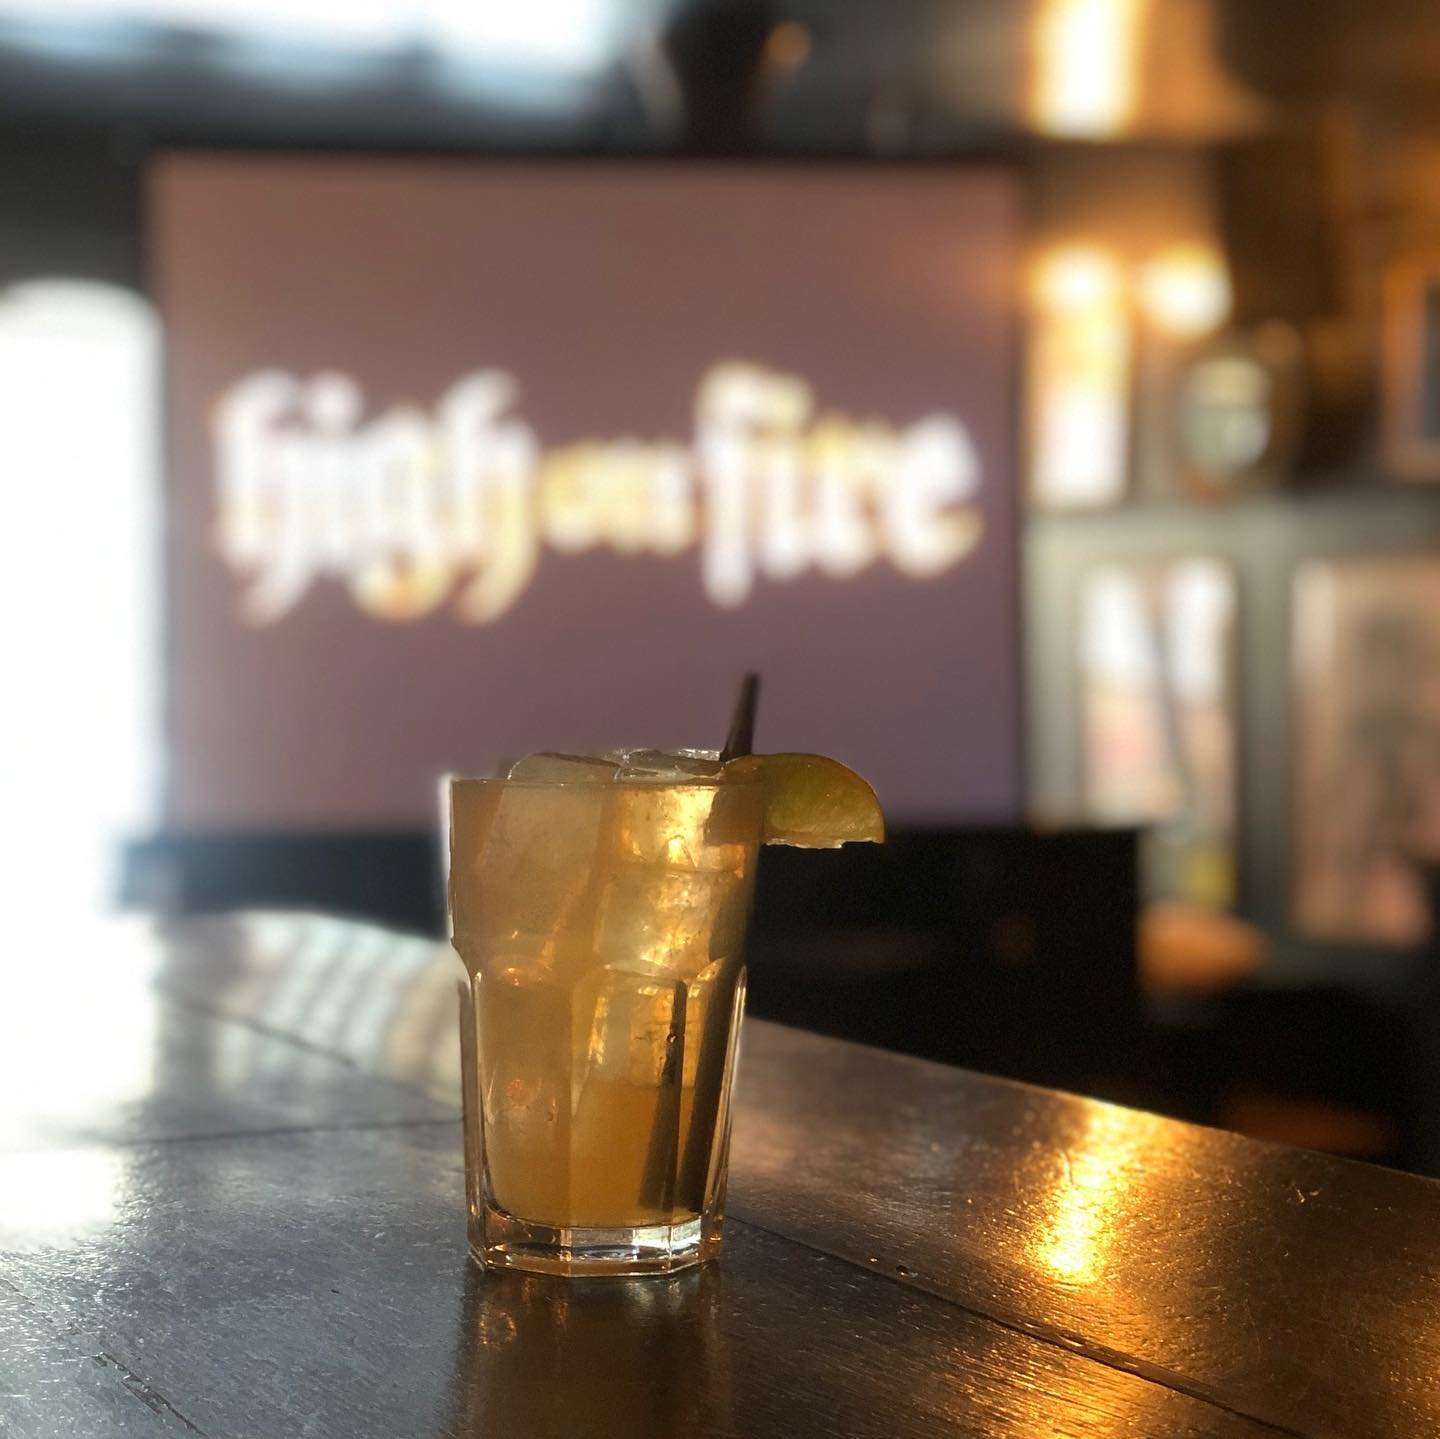 All set for this evening&rsquo;s HIGH ON FIRE listening party here in grotty olde London. The vinyl have safely arrived via some expert couriering, Dark n&rsquo; Stormy cocktails are ready to pour, tons of beer on and 2 Islington gig tix burning a ho